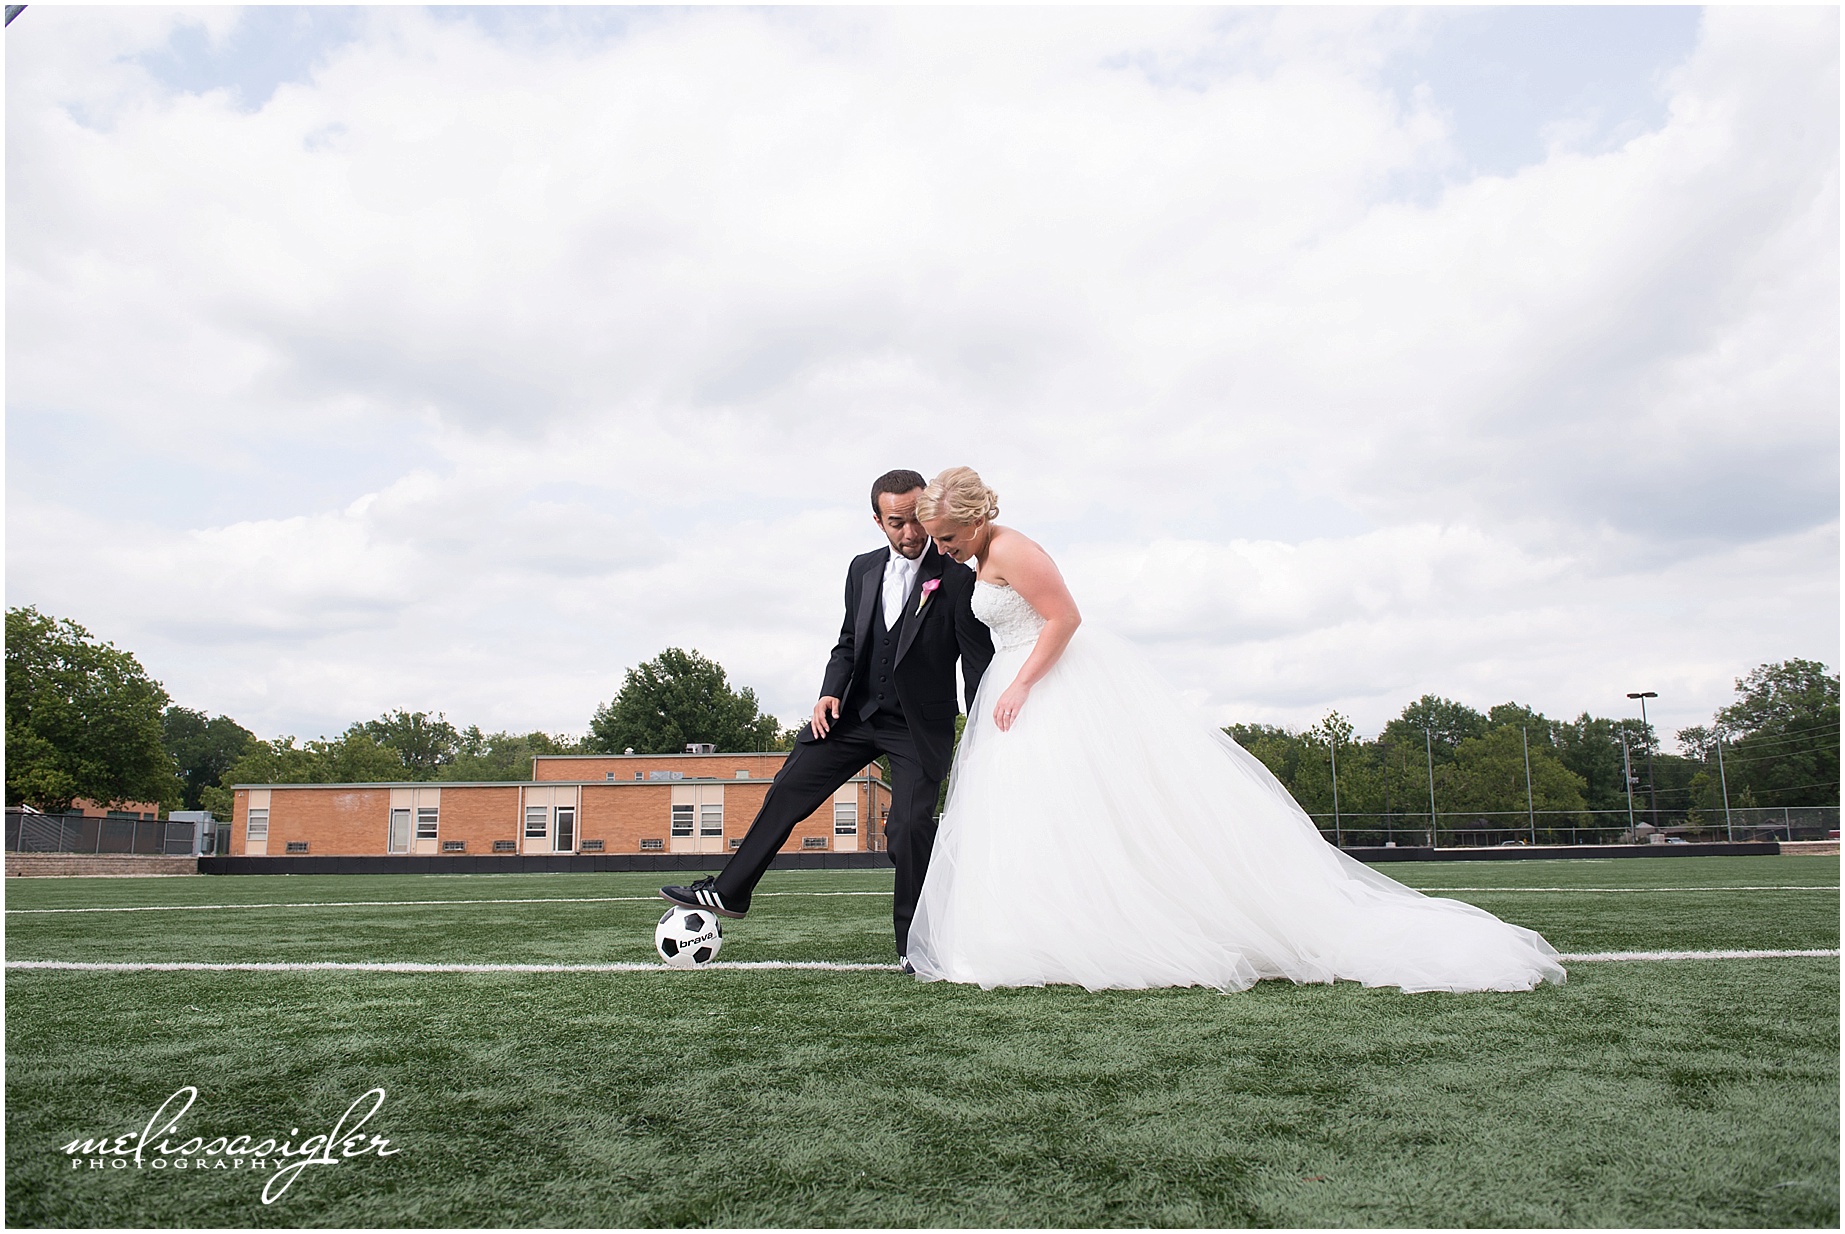 Bride and groom playing soccer in Lawrence Kansas by Melissa Sigler Photography